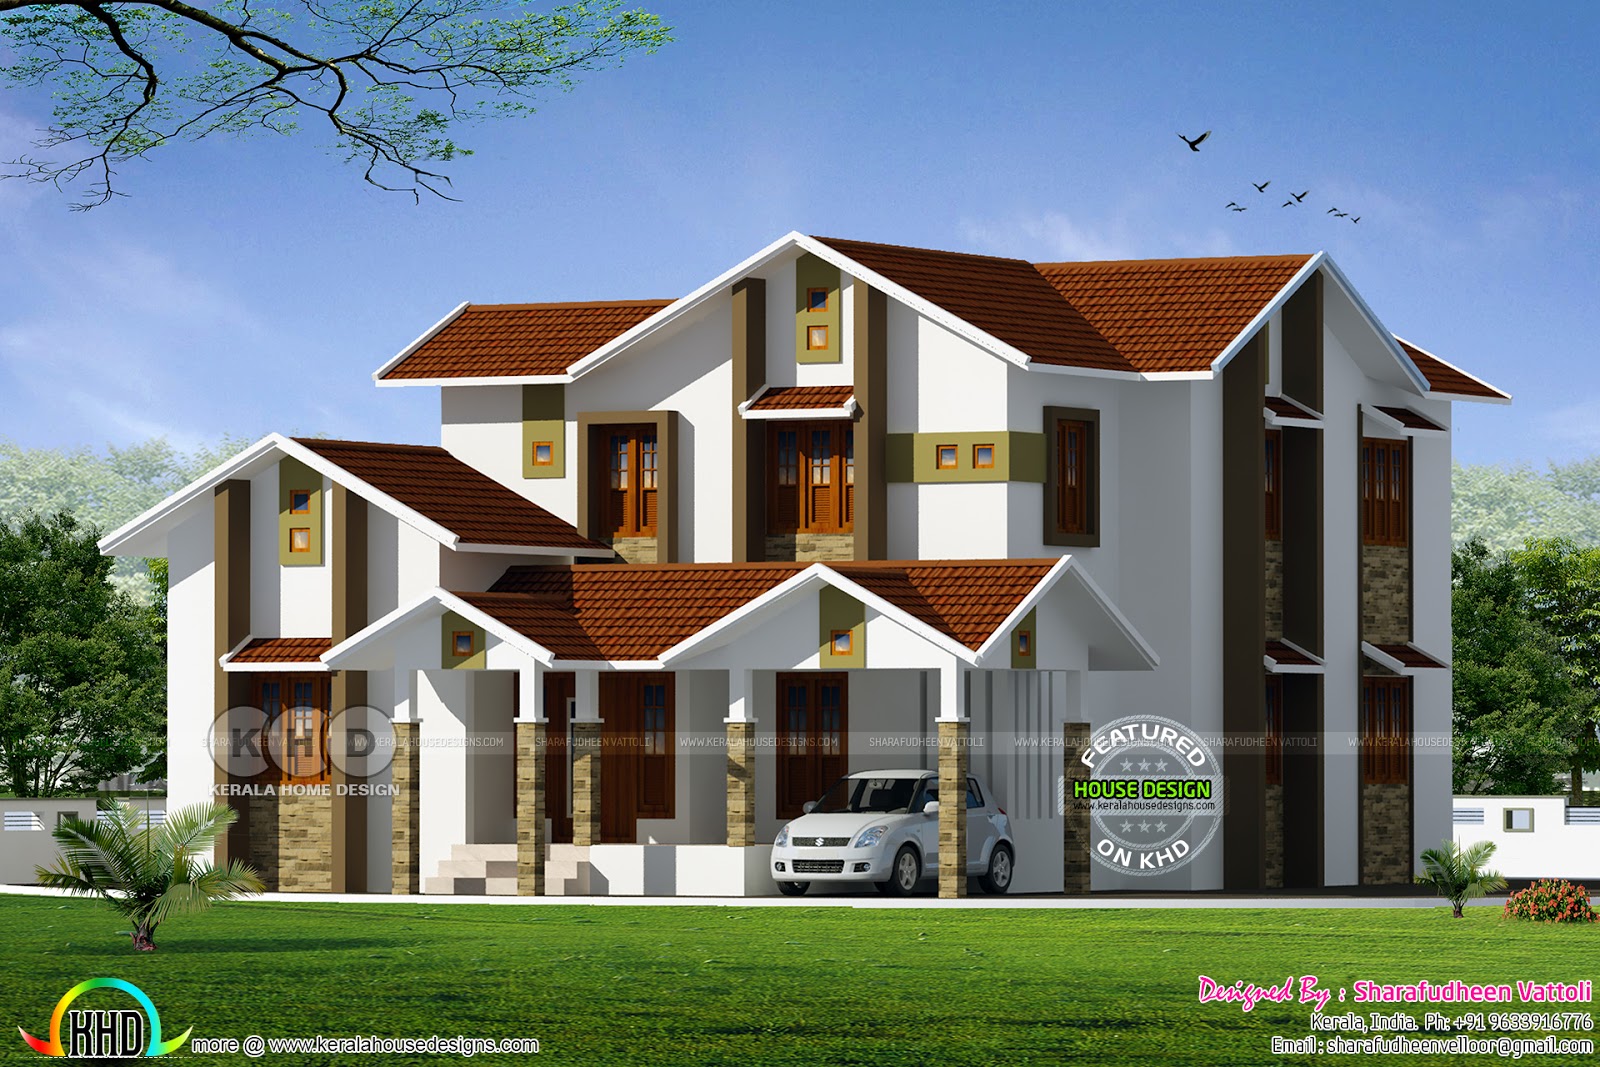 Modern home with floor plan and compound wall design - Kerala home design and floor plans - 8000 ...